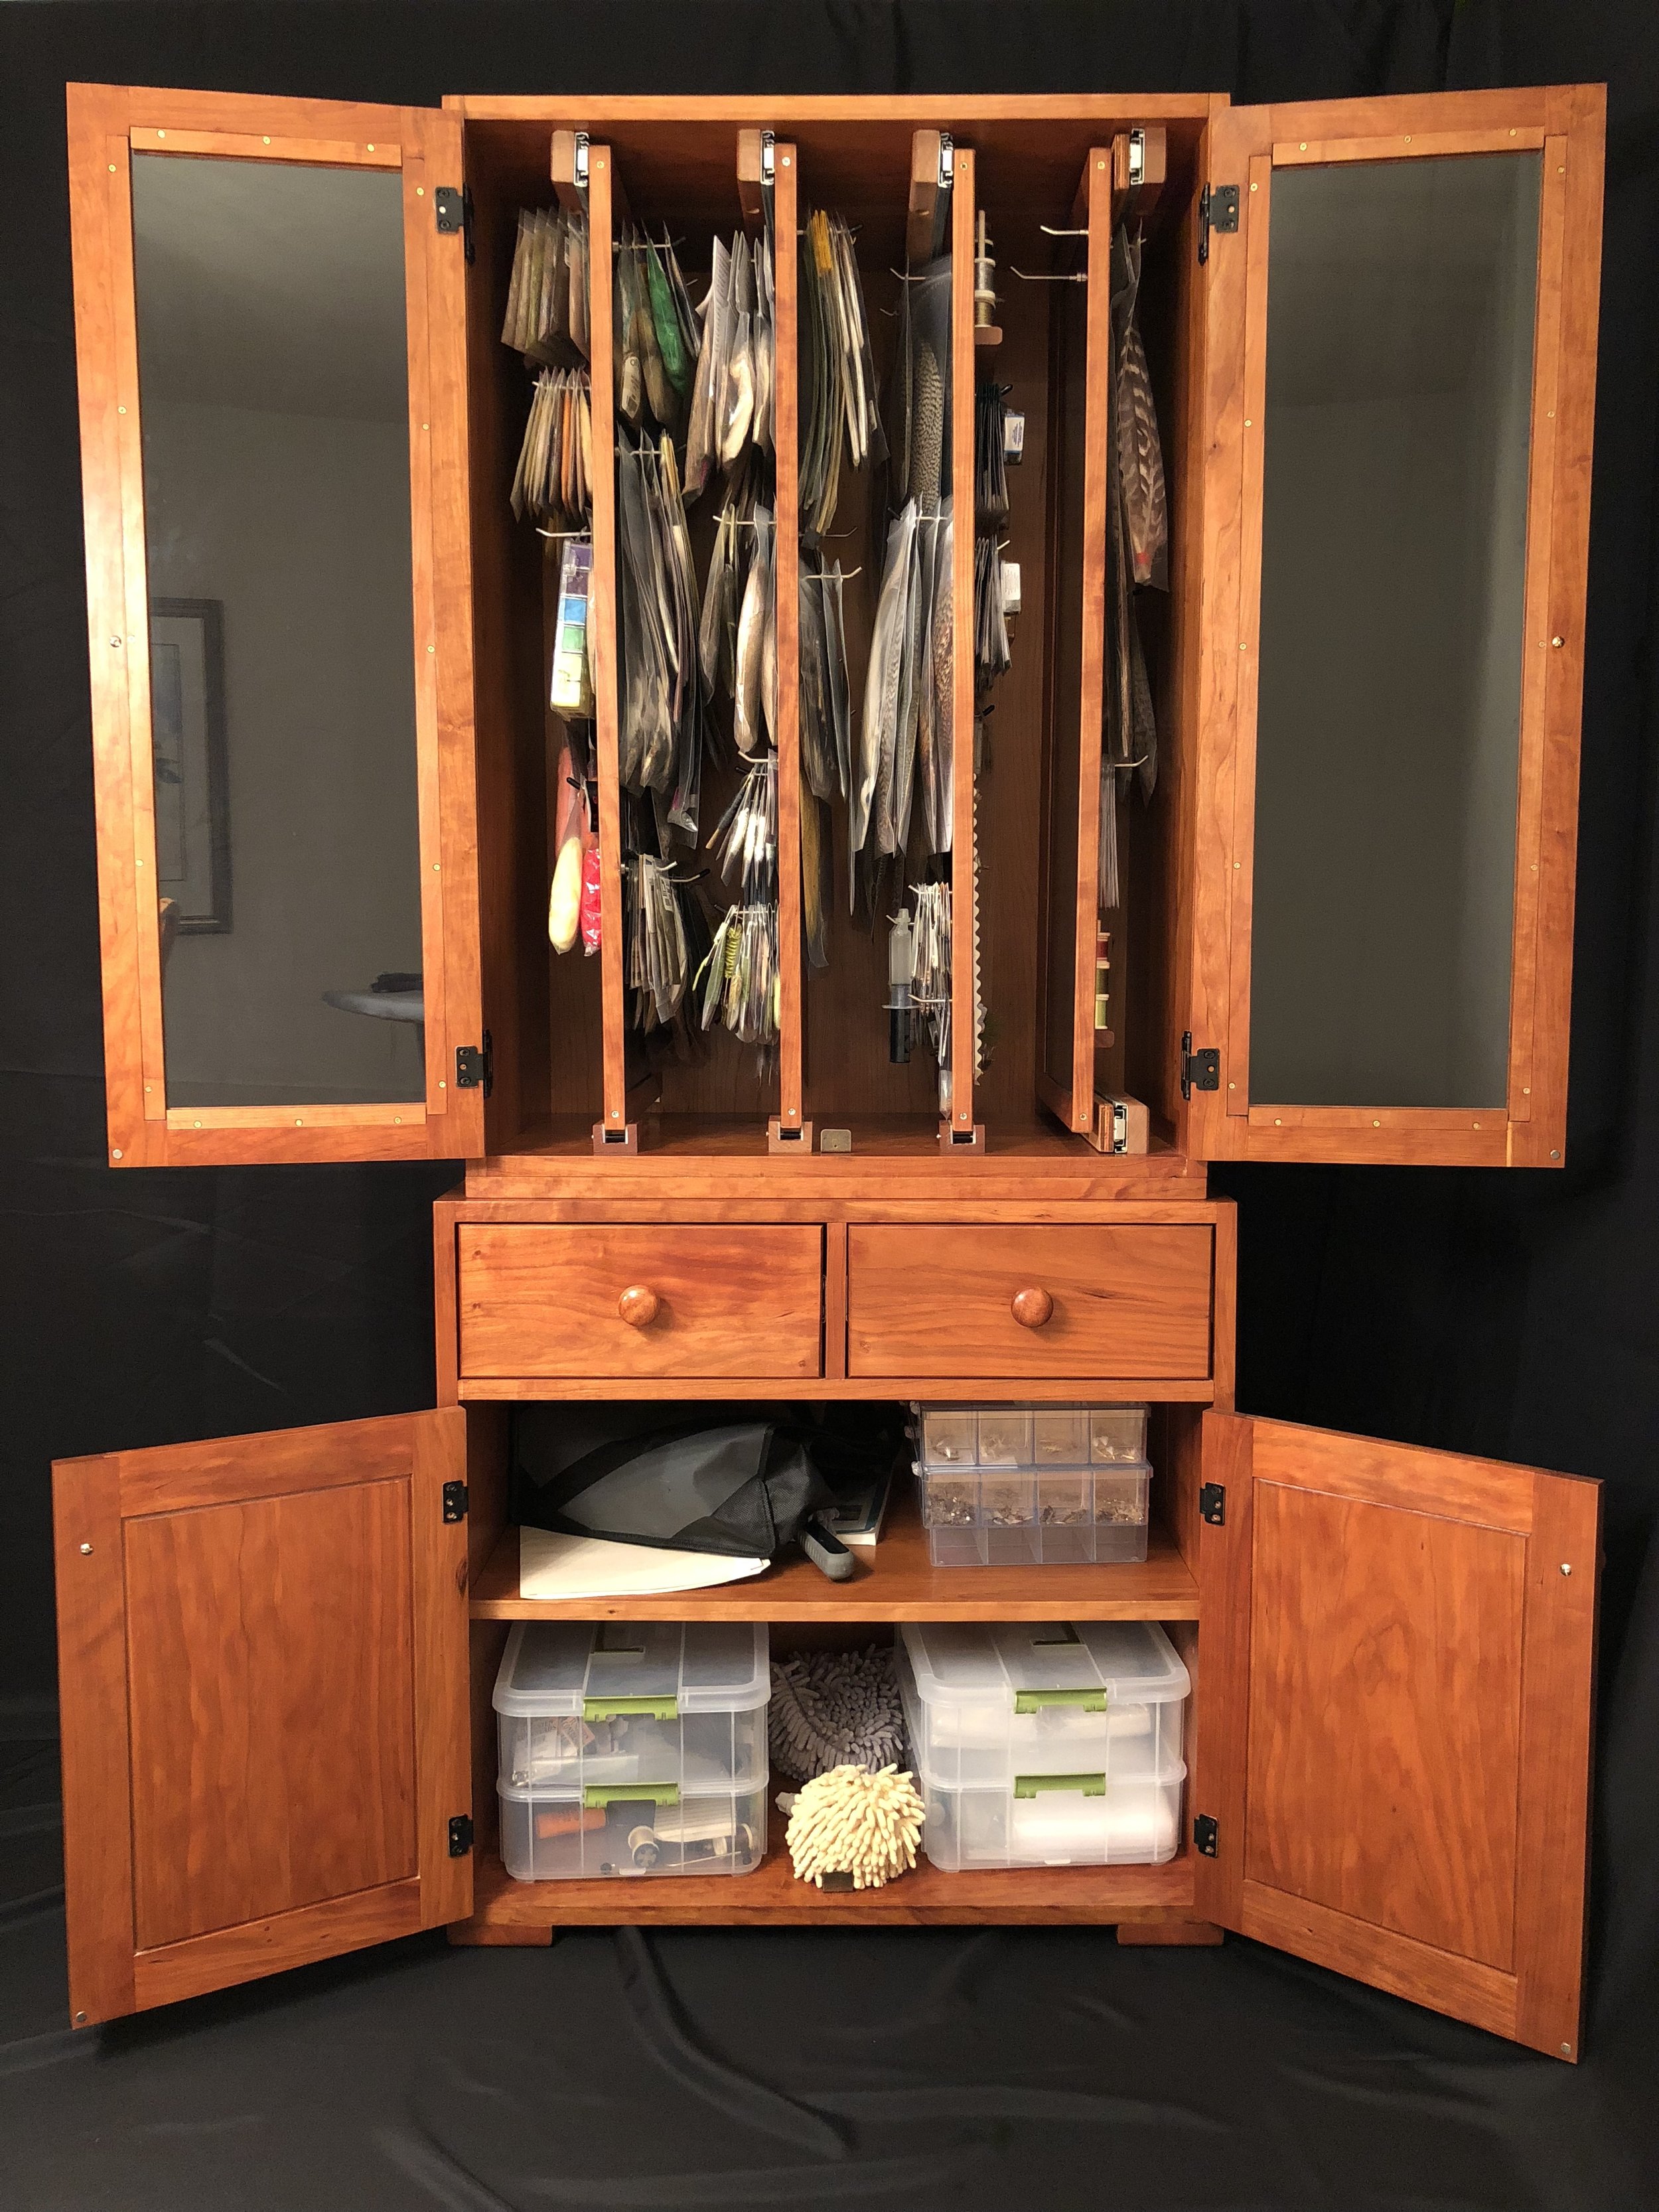 Trout Run Cabinets